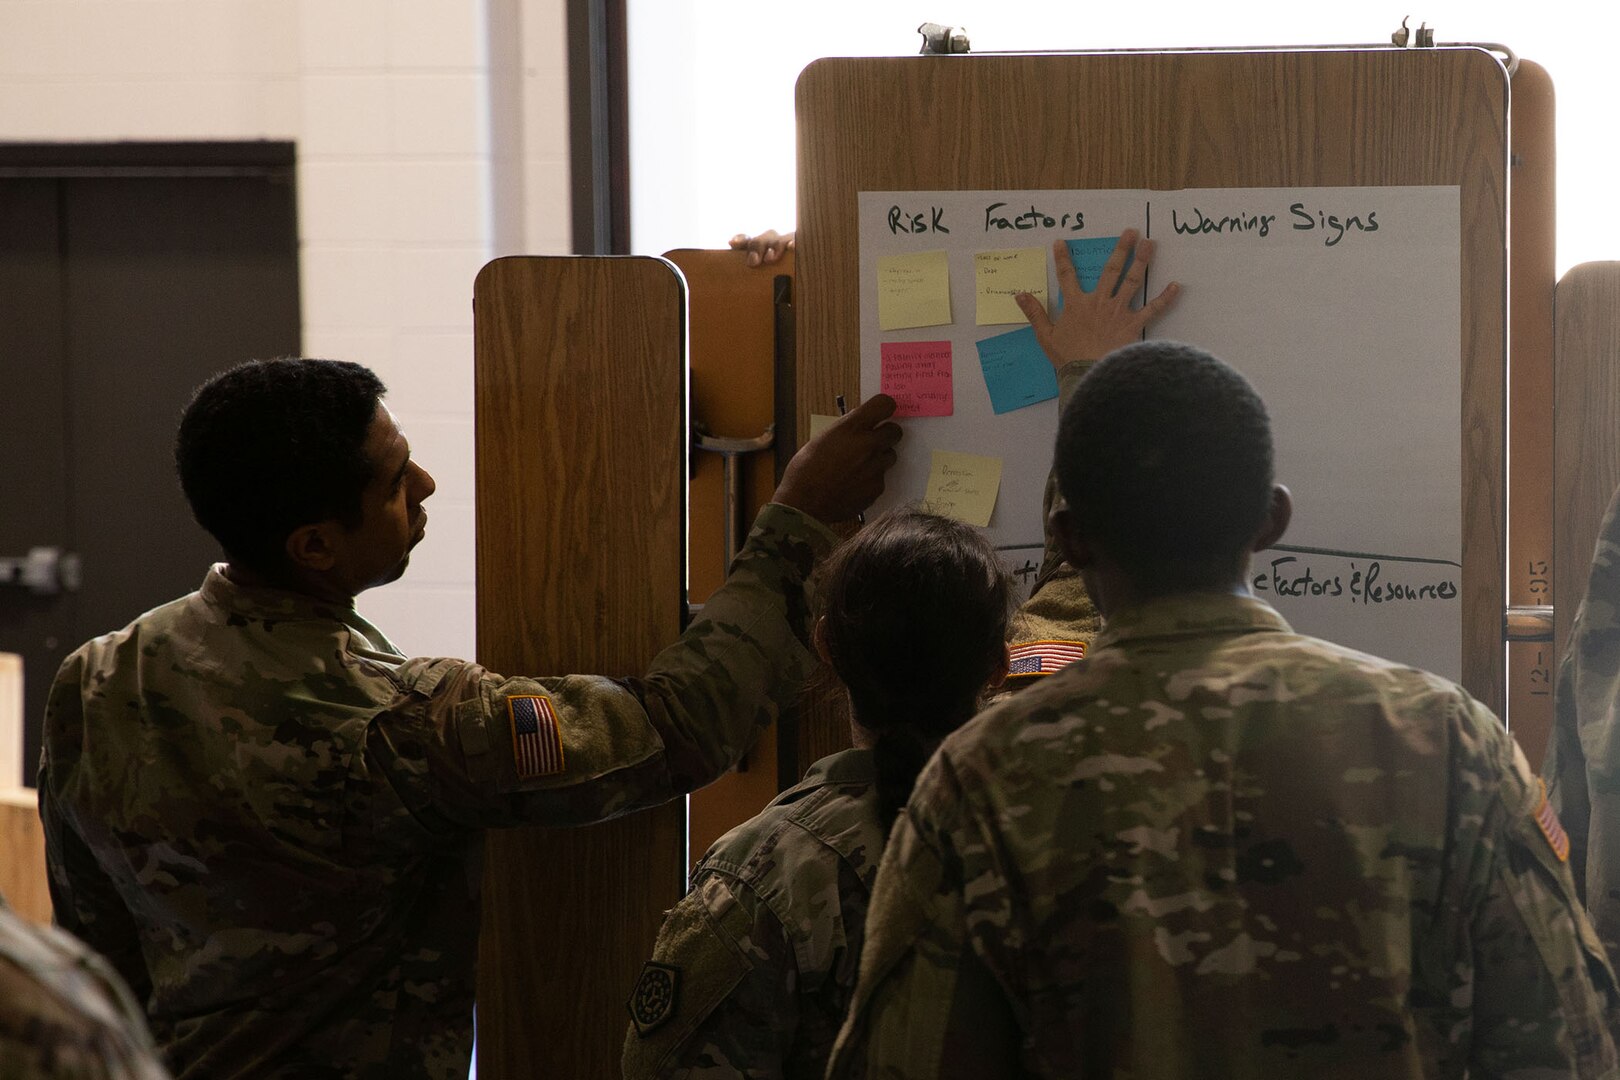 Soldiers from the Illinois Army National Guard’s 1244th Transportation Company participate in breakout sessions discussing the risk factors and warning signs of suicide during Suicide Prevention training at the North Riverside Armory in Broadville, Illinois, on September 10, 2022.